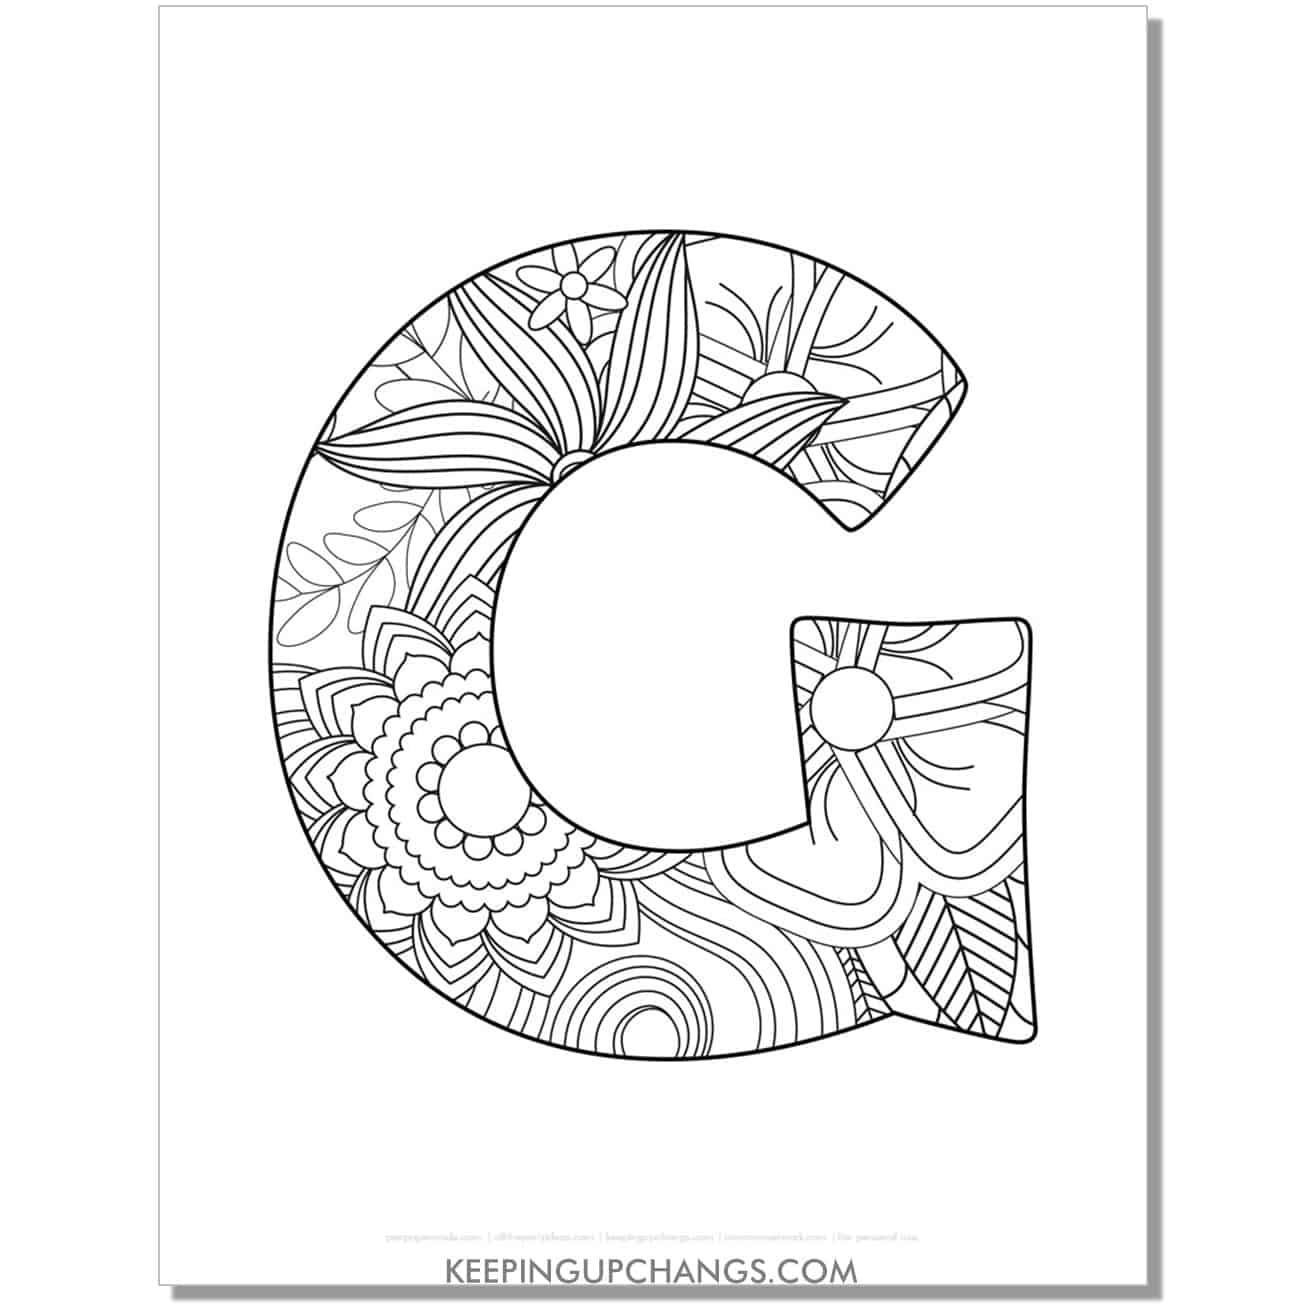 free letter g to color, complex mandala zentangle for adults.